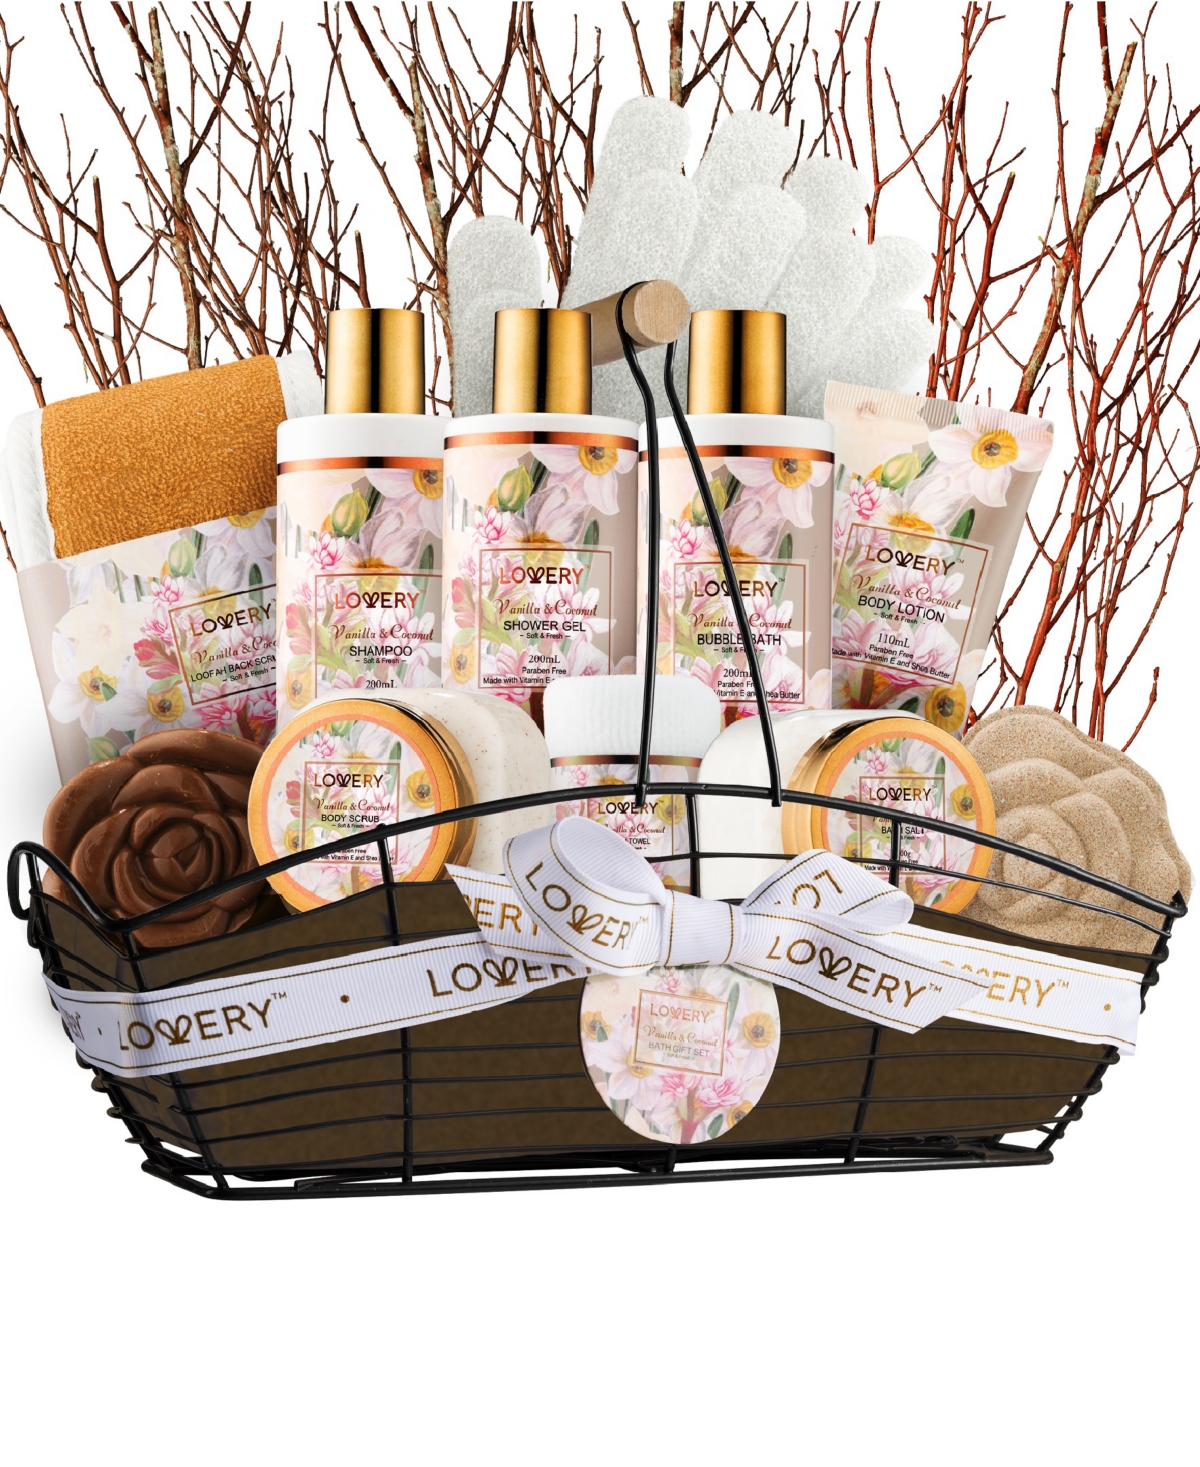 Lovery Home Spa Body Care Gift Set, Vanilla Coconut Bath and Body Gift Set and Self Care Package, 13 Piece